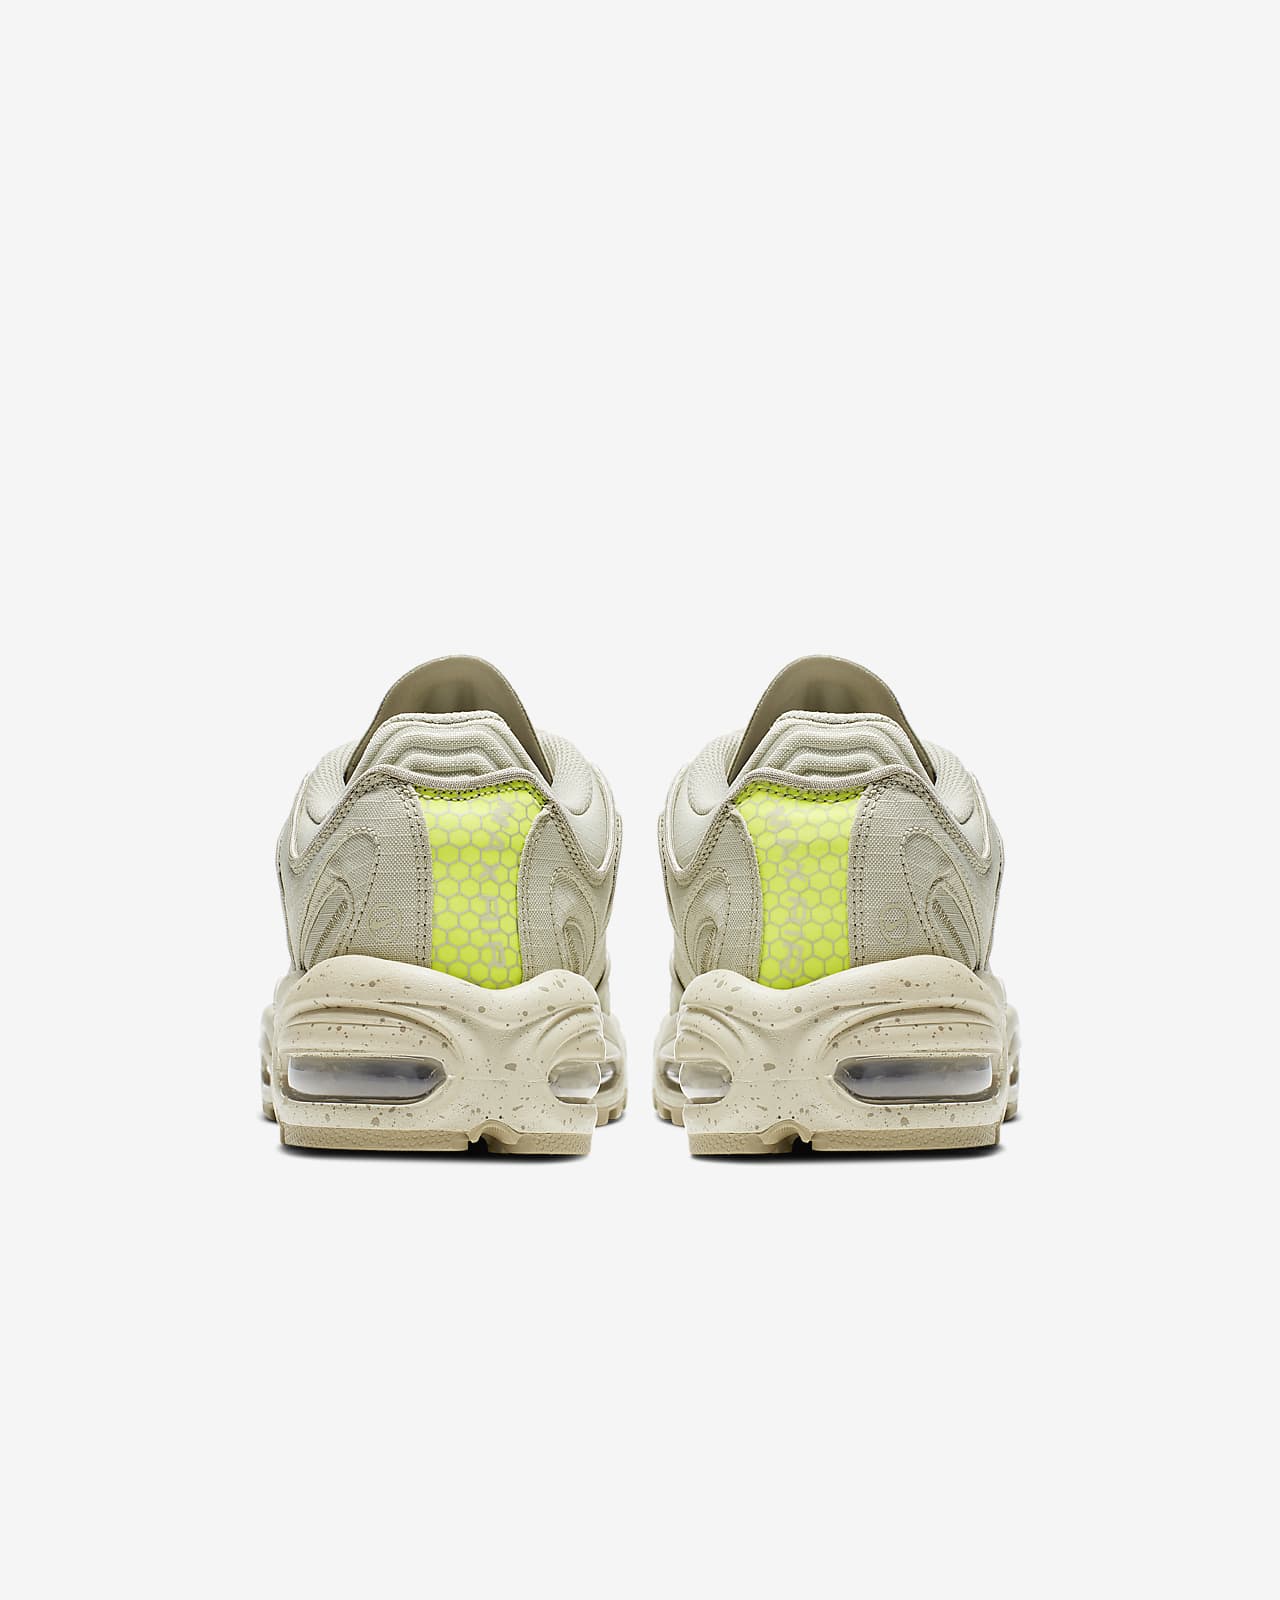 air max tailwind iv sneakers